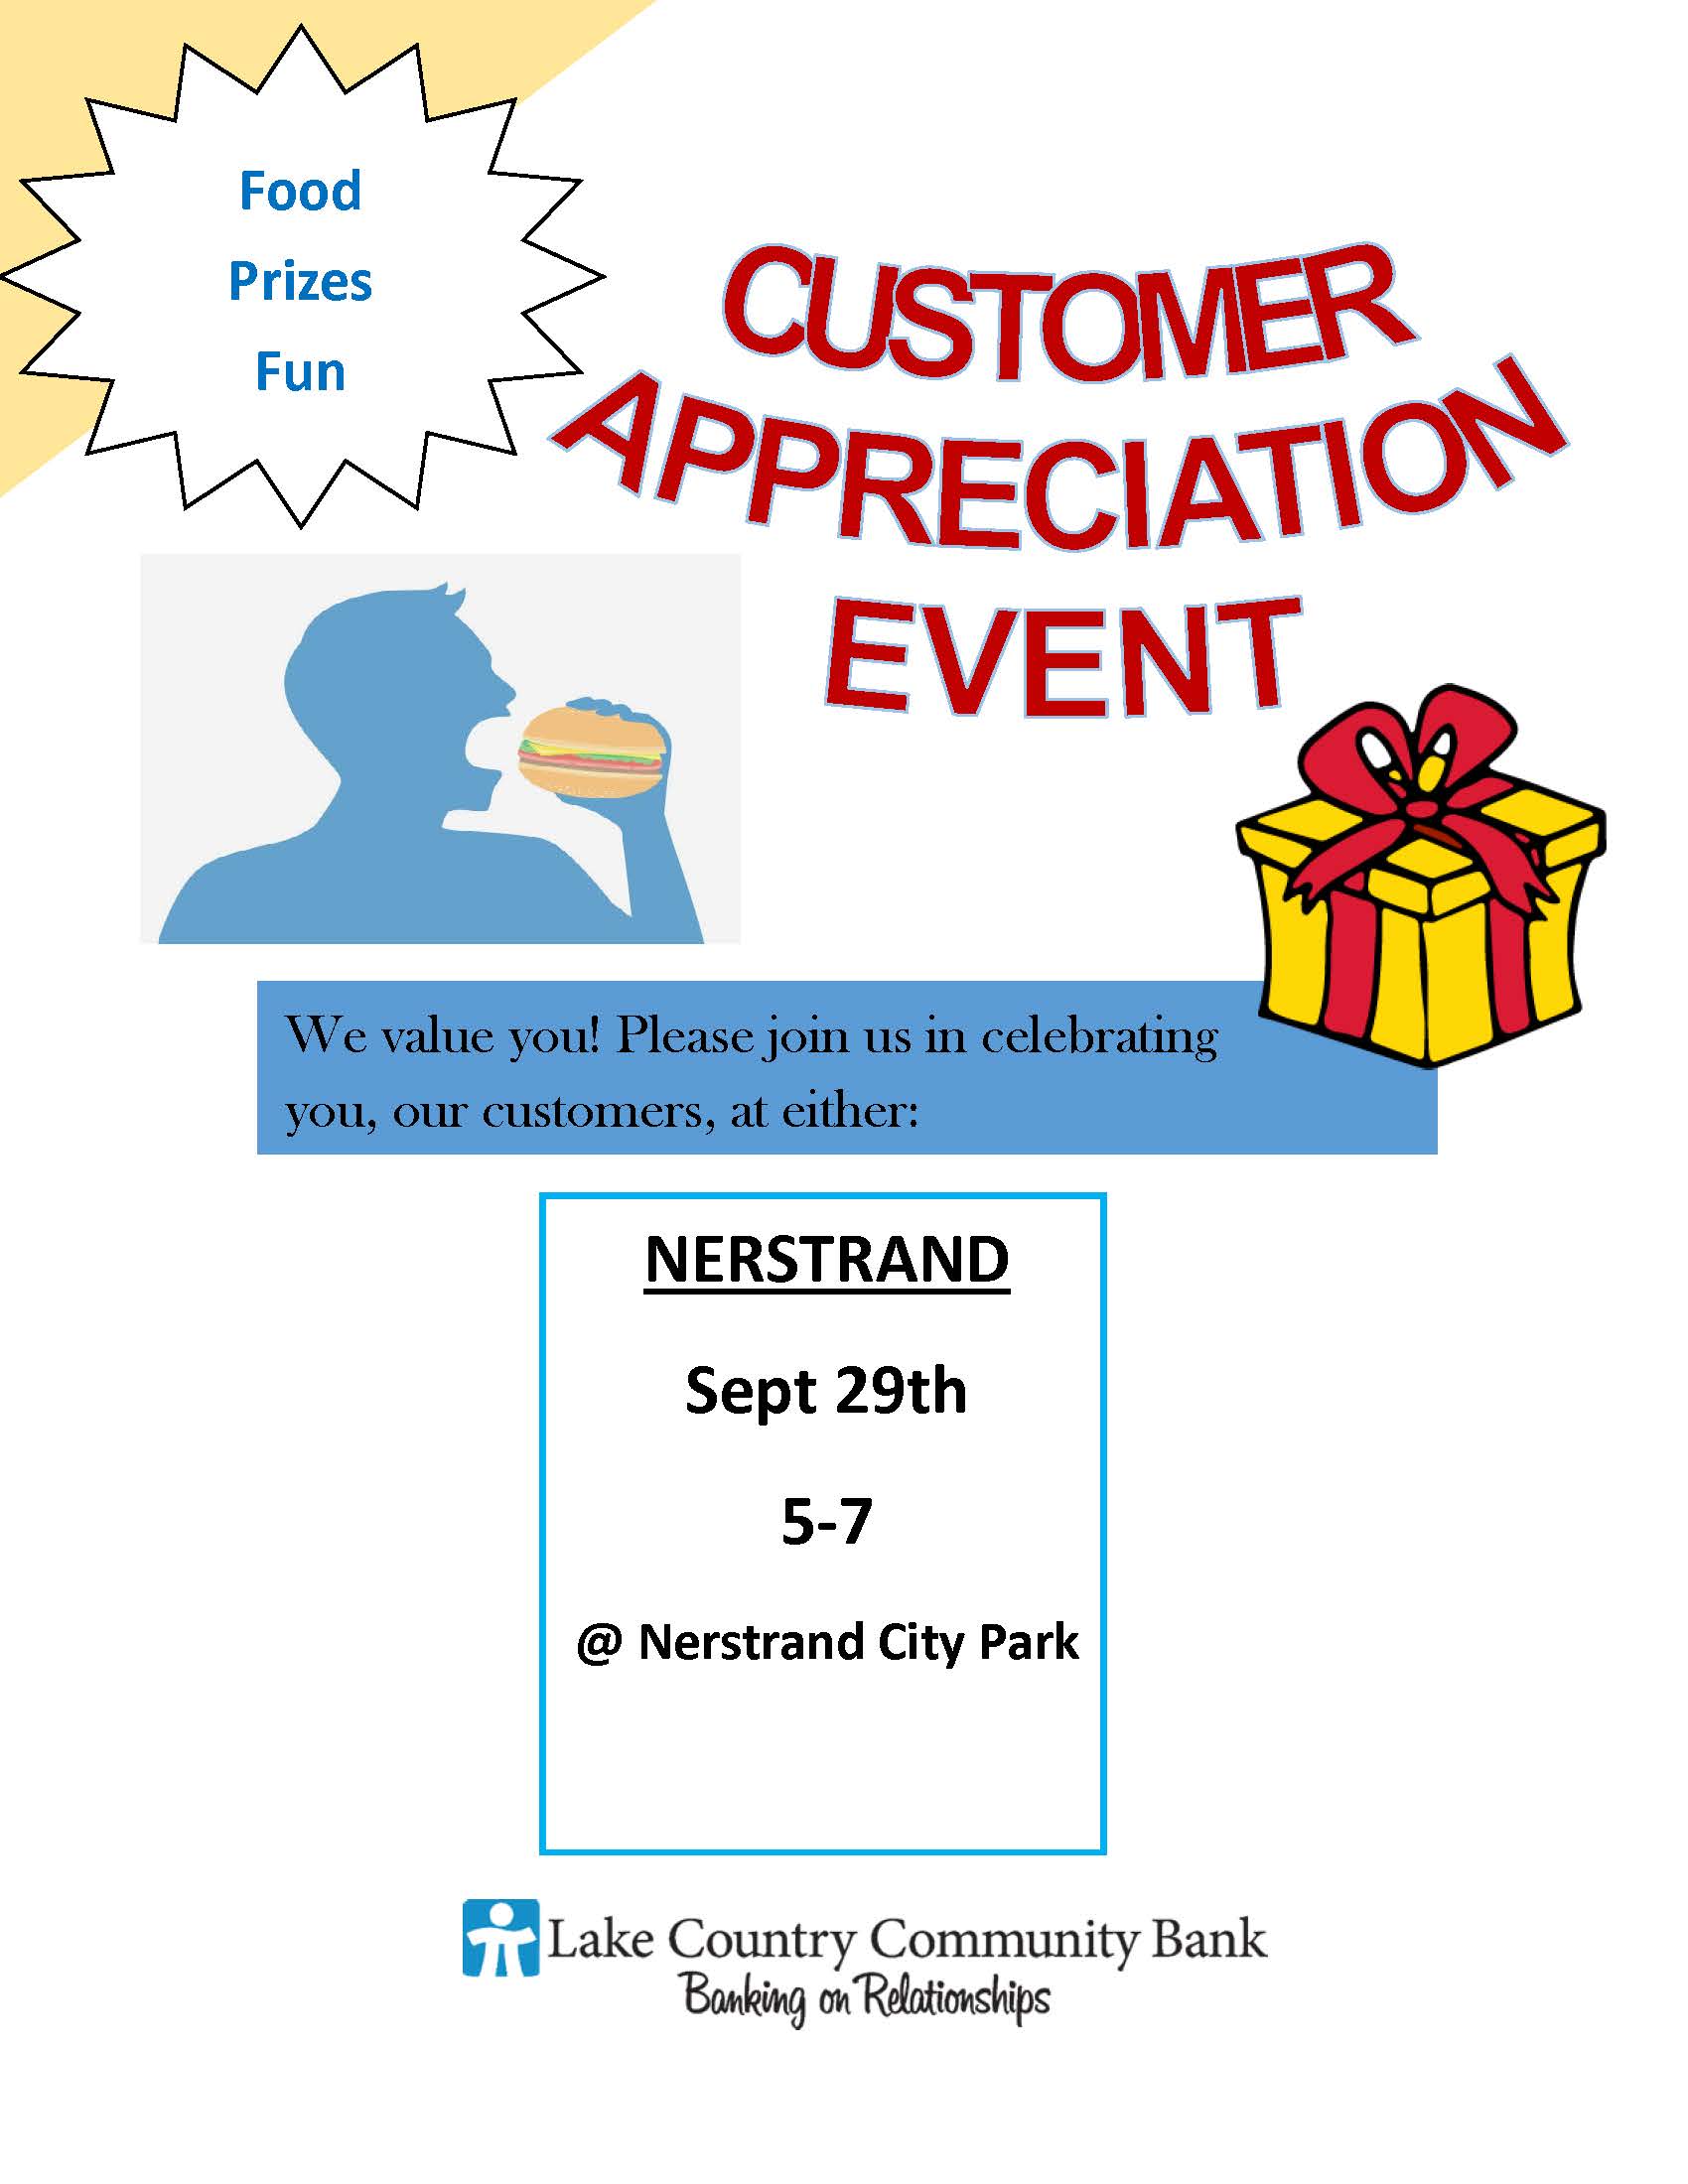 Customer Appreciation Event. We value you! Please join us in celebrating you, our customers, at either: Nerstrand Sept 29th 5-7 at Nerstrand City Park